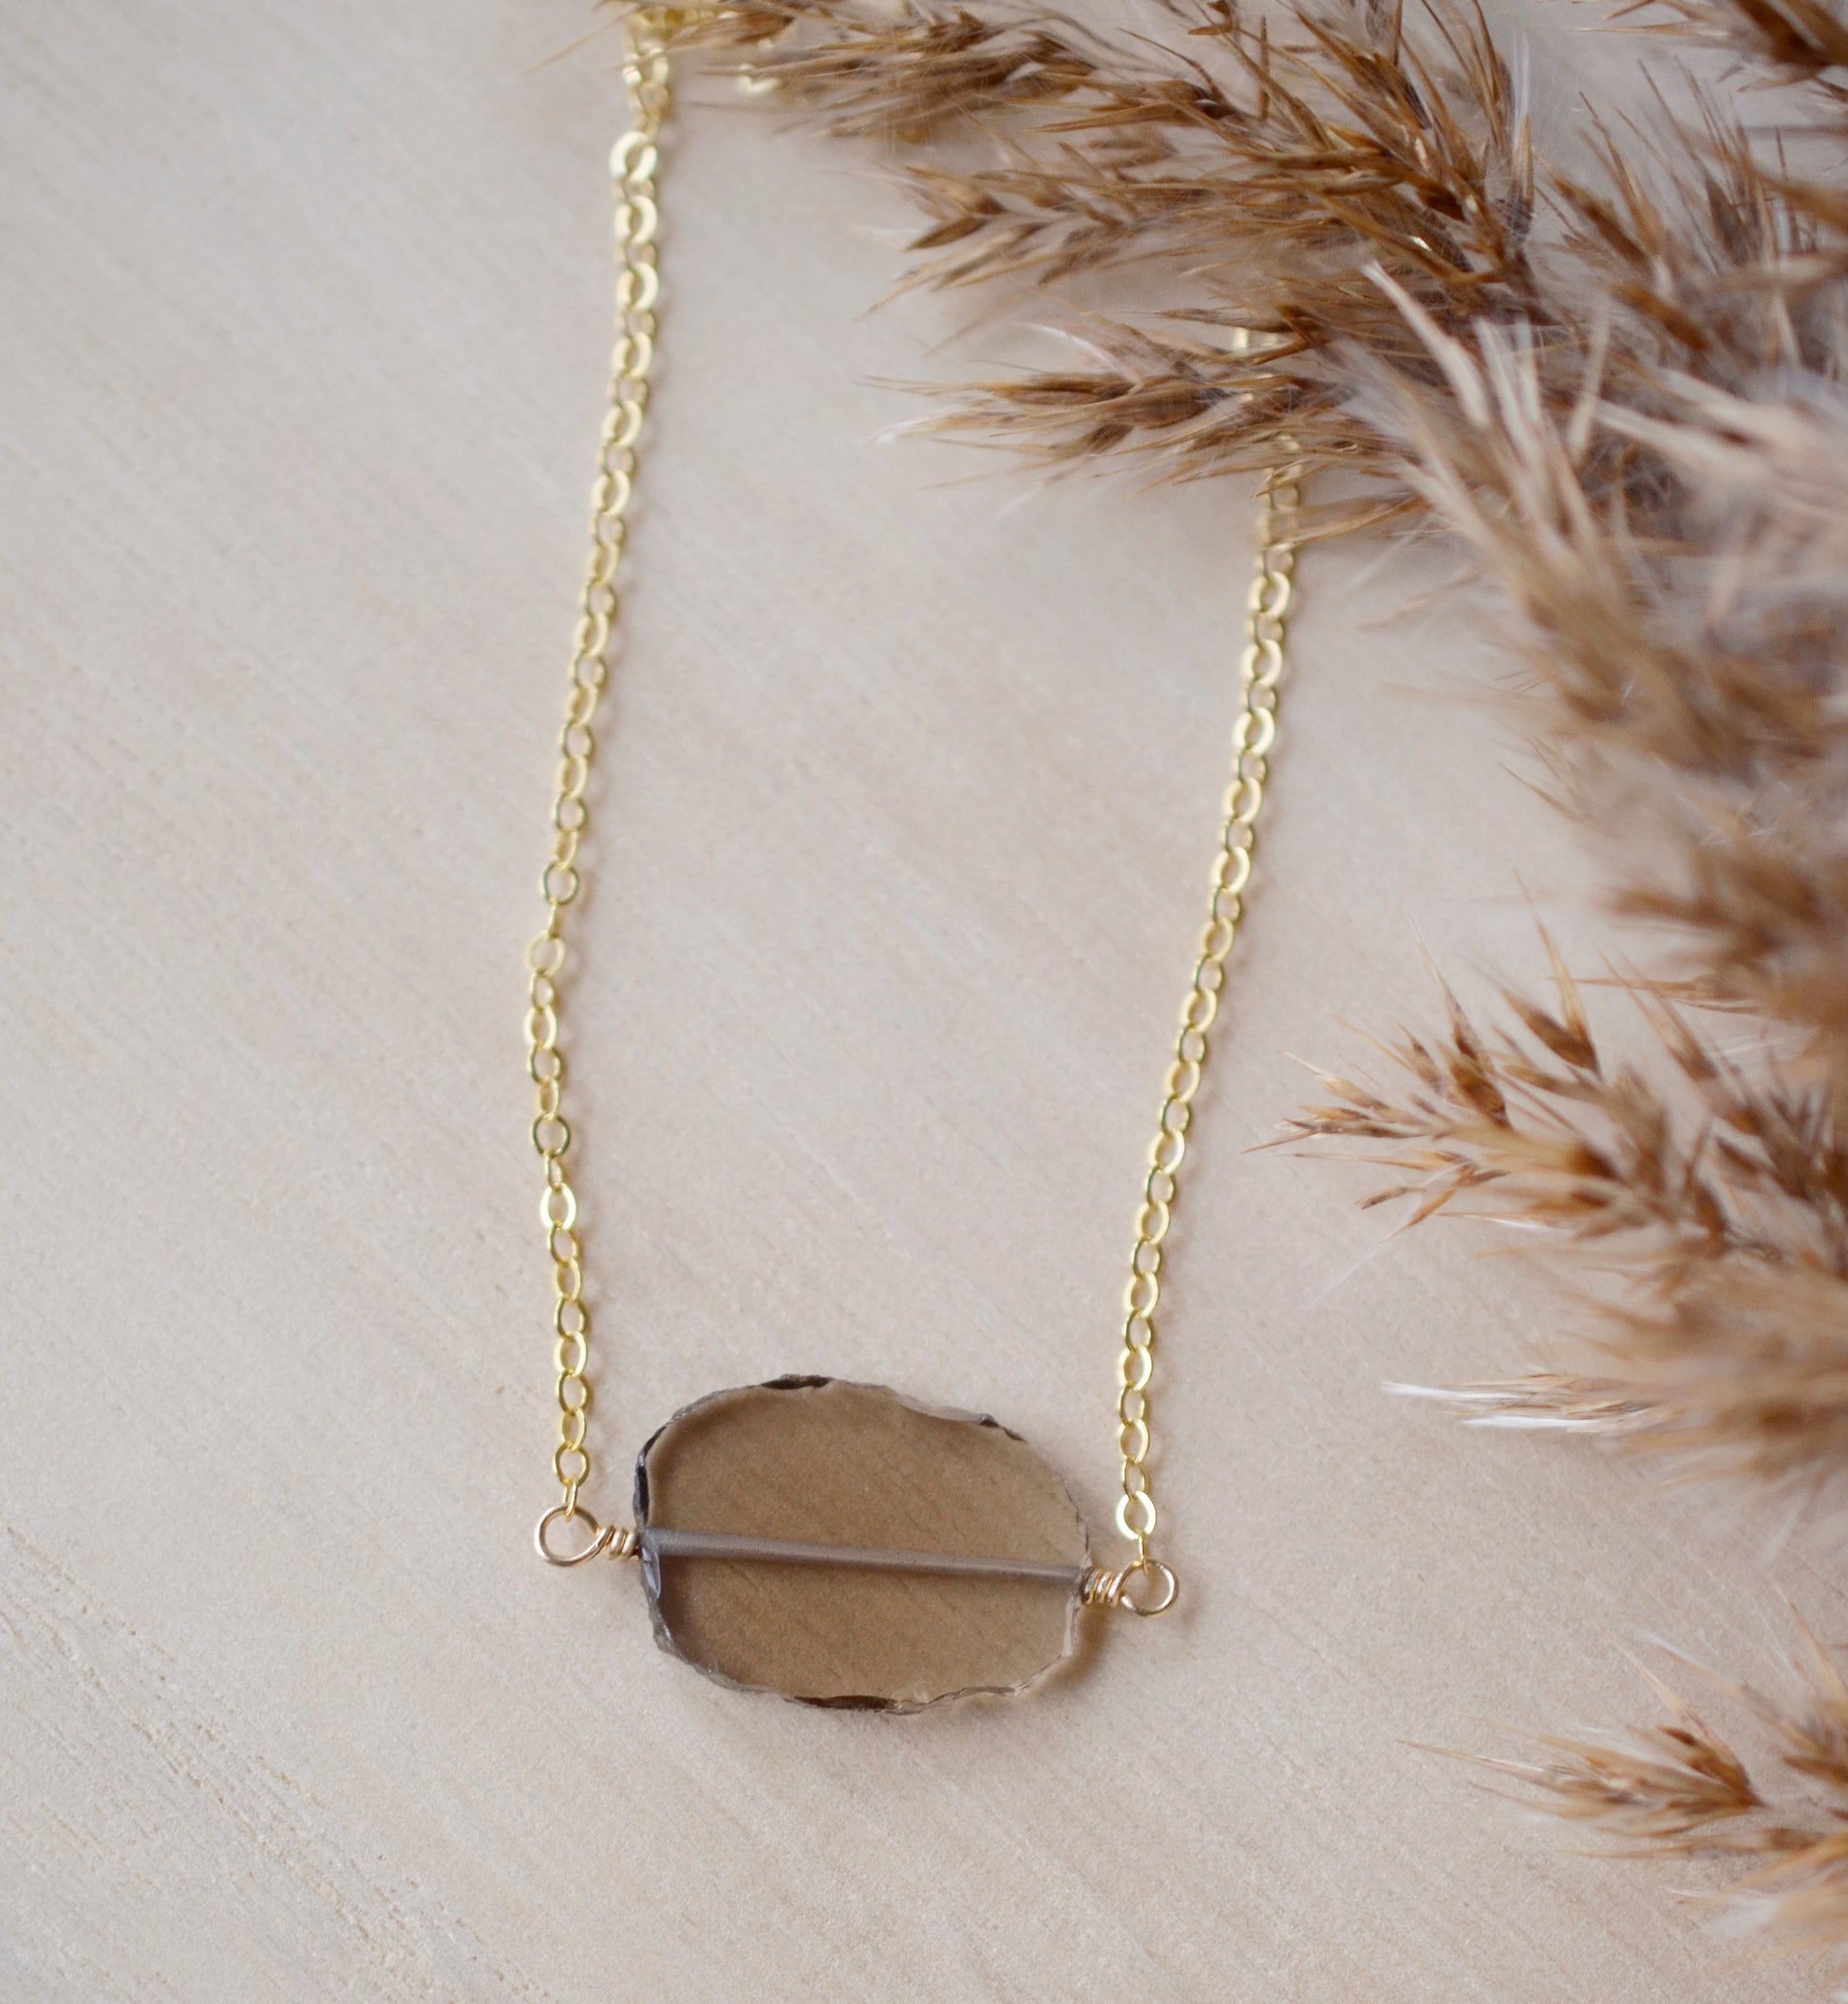 An irregular oval shape, smooth polished Smokey Quartz stone set onto a 14k gold filled chain. The stones edges are raw and irregular. 